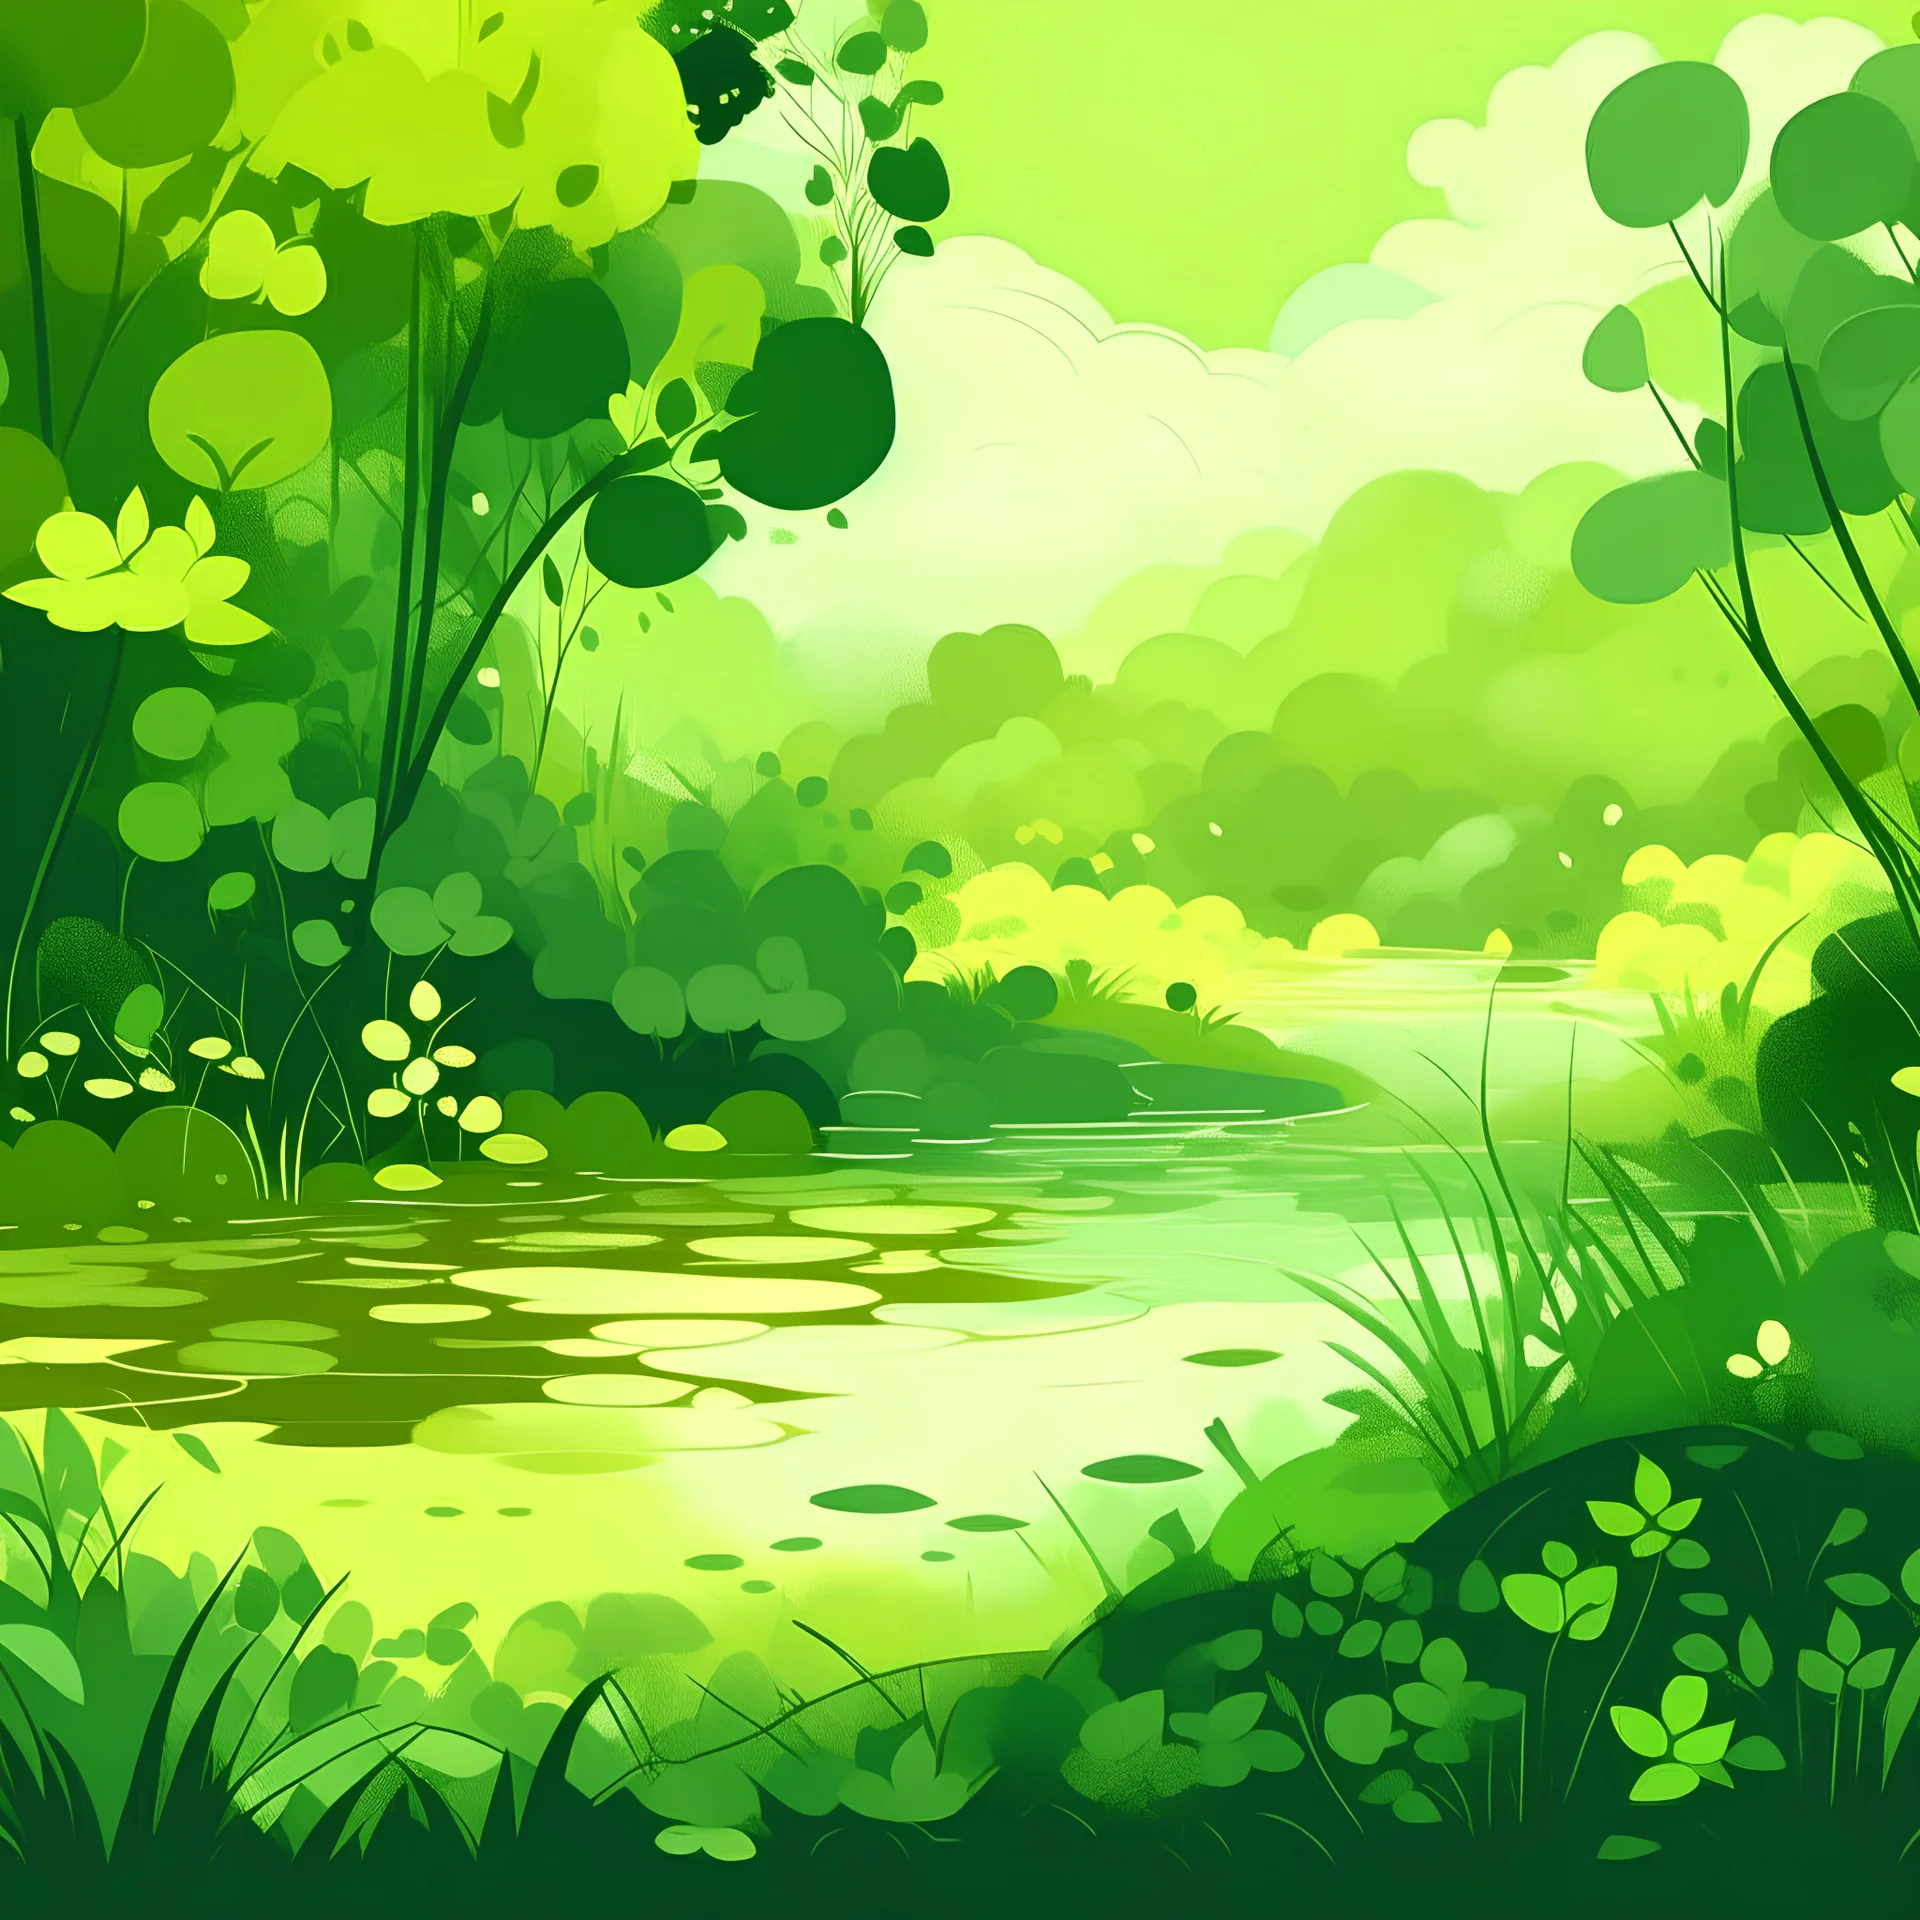 Abstract illustration of a garden with a lake. Colors are light green and yellow. Some parts of image are very out of focus. Heavy grain texture.